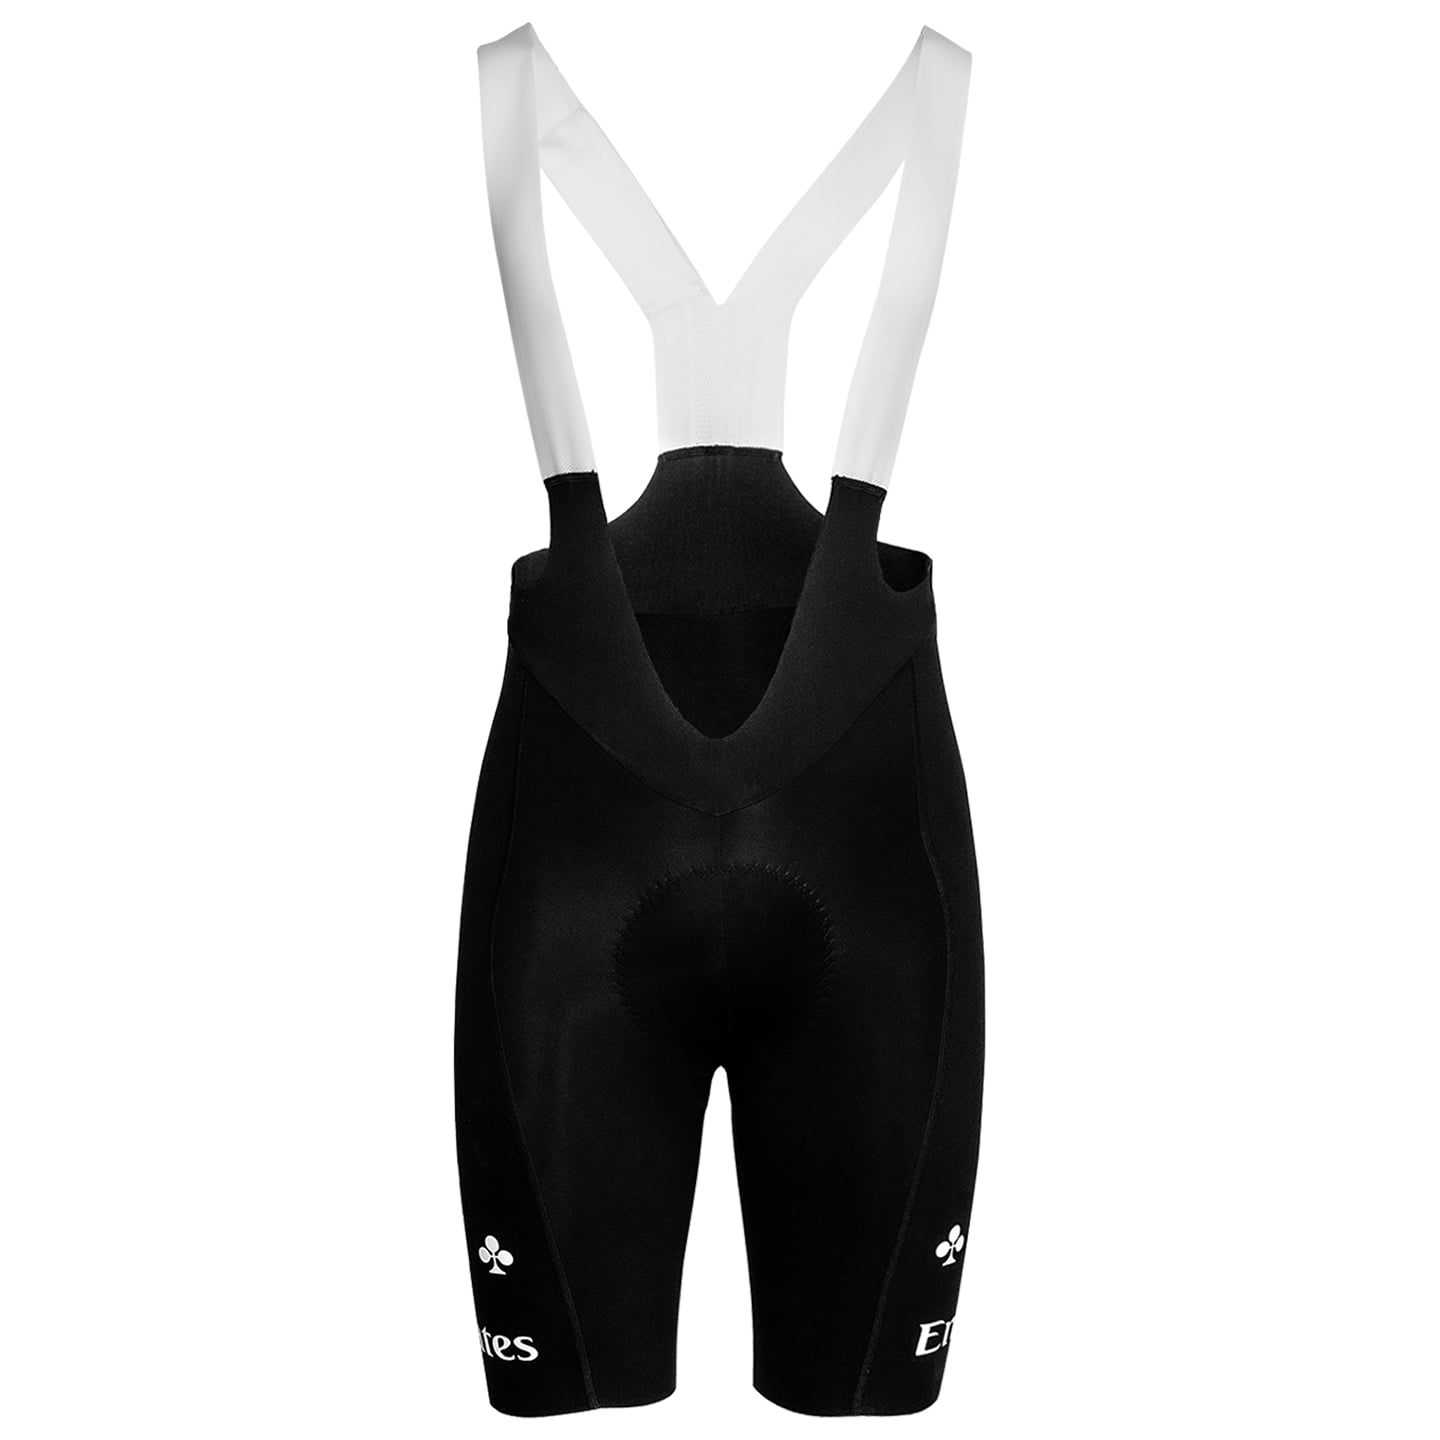 UAE TEAM EMIRATES Race 2023 Bib Shorts, for men, size 2XL, Cycle trousers, Cycle gear